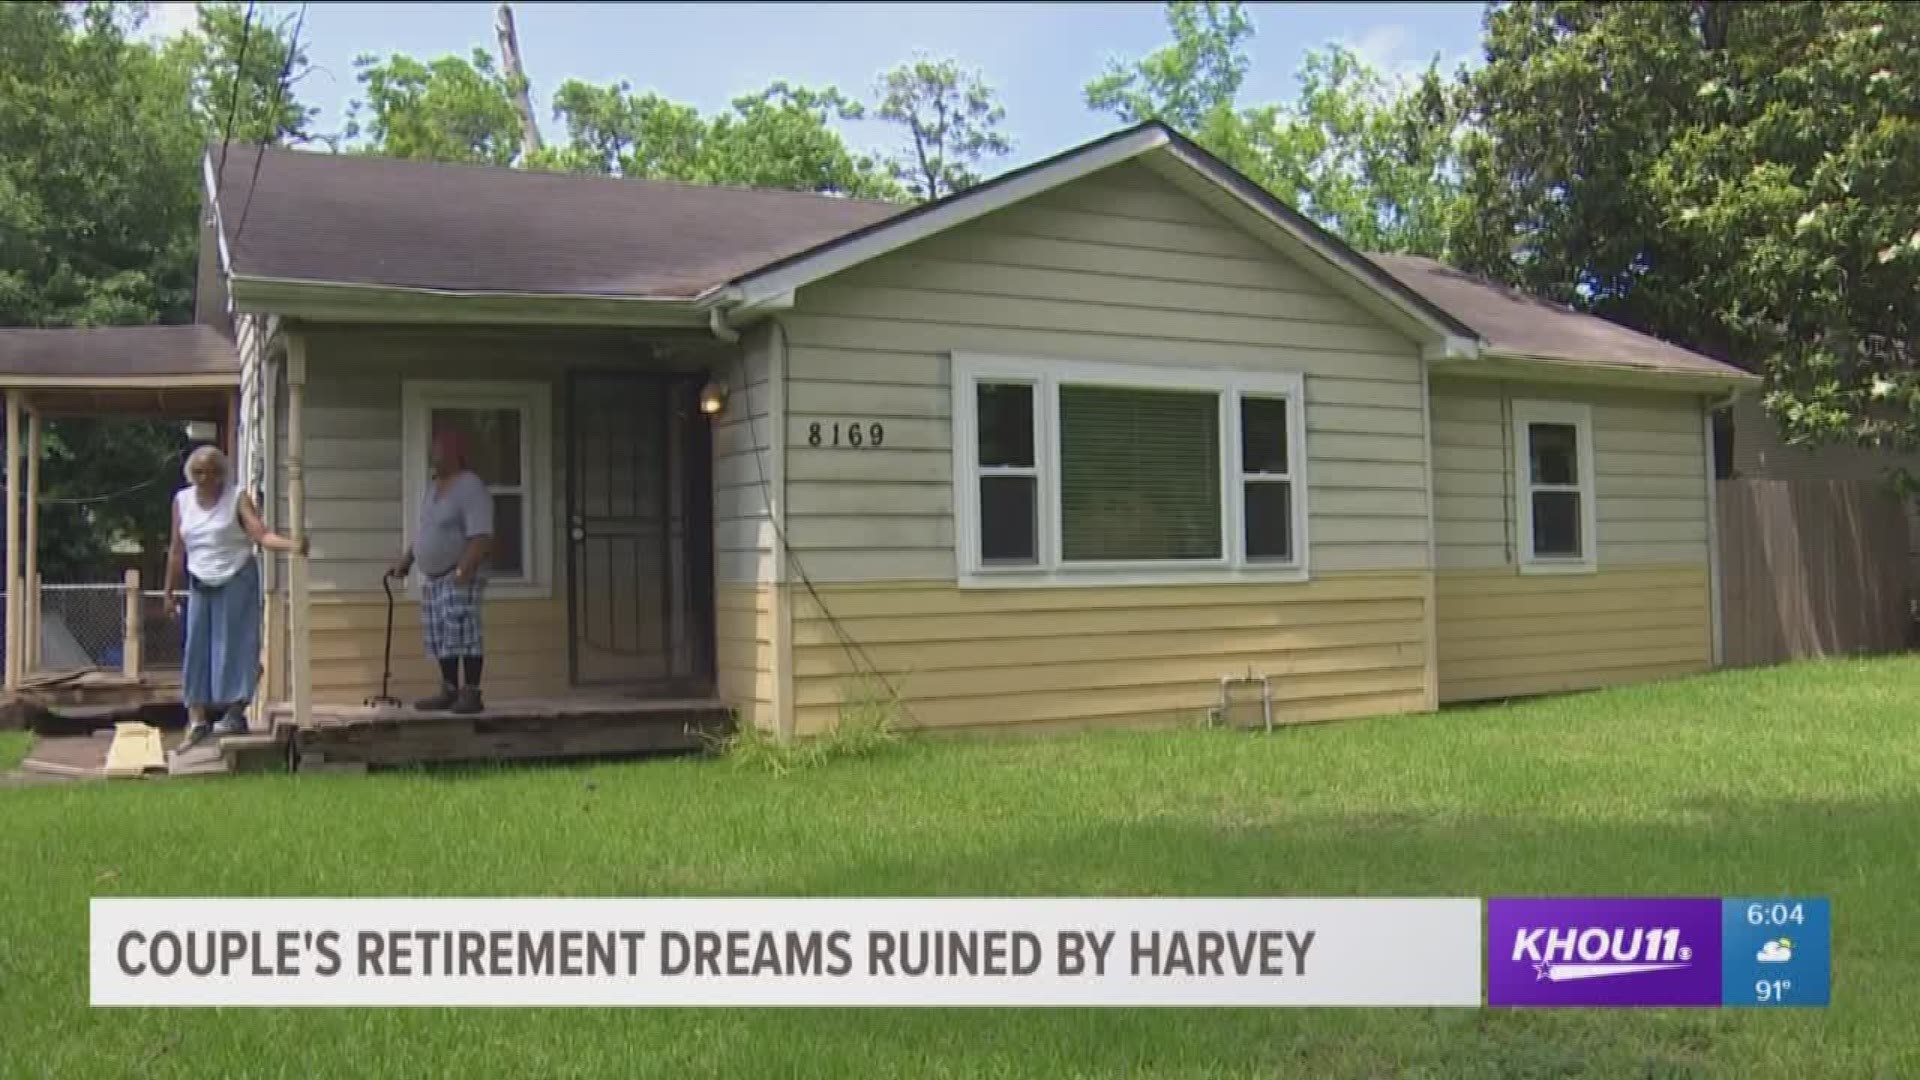 Harvey's forgotten victims include many of Houston's working class who did not qualify for FEMA assistance and are now in desperate need of help. The Washingtons retired from their careers as civil servants and had planned on a living the rest of their ye